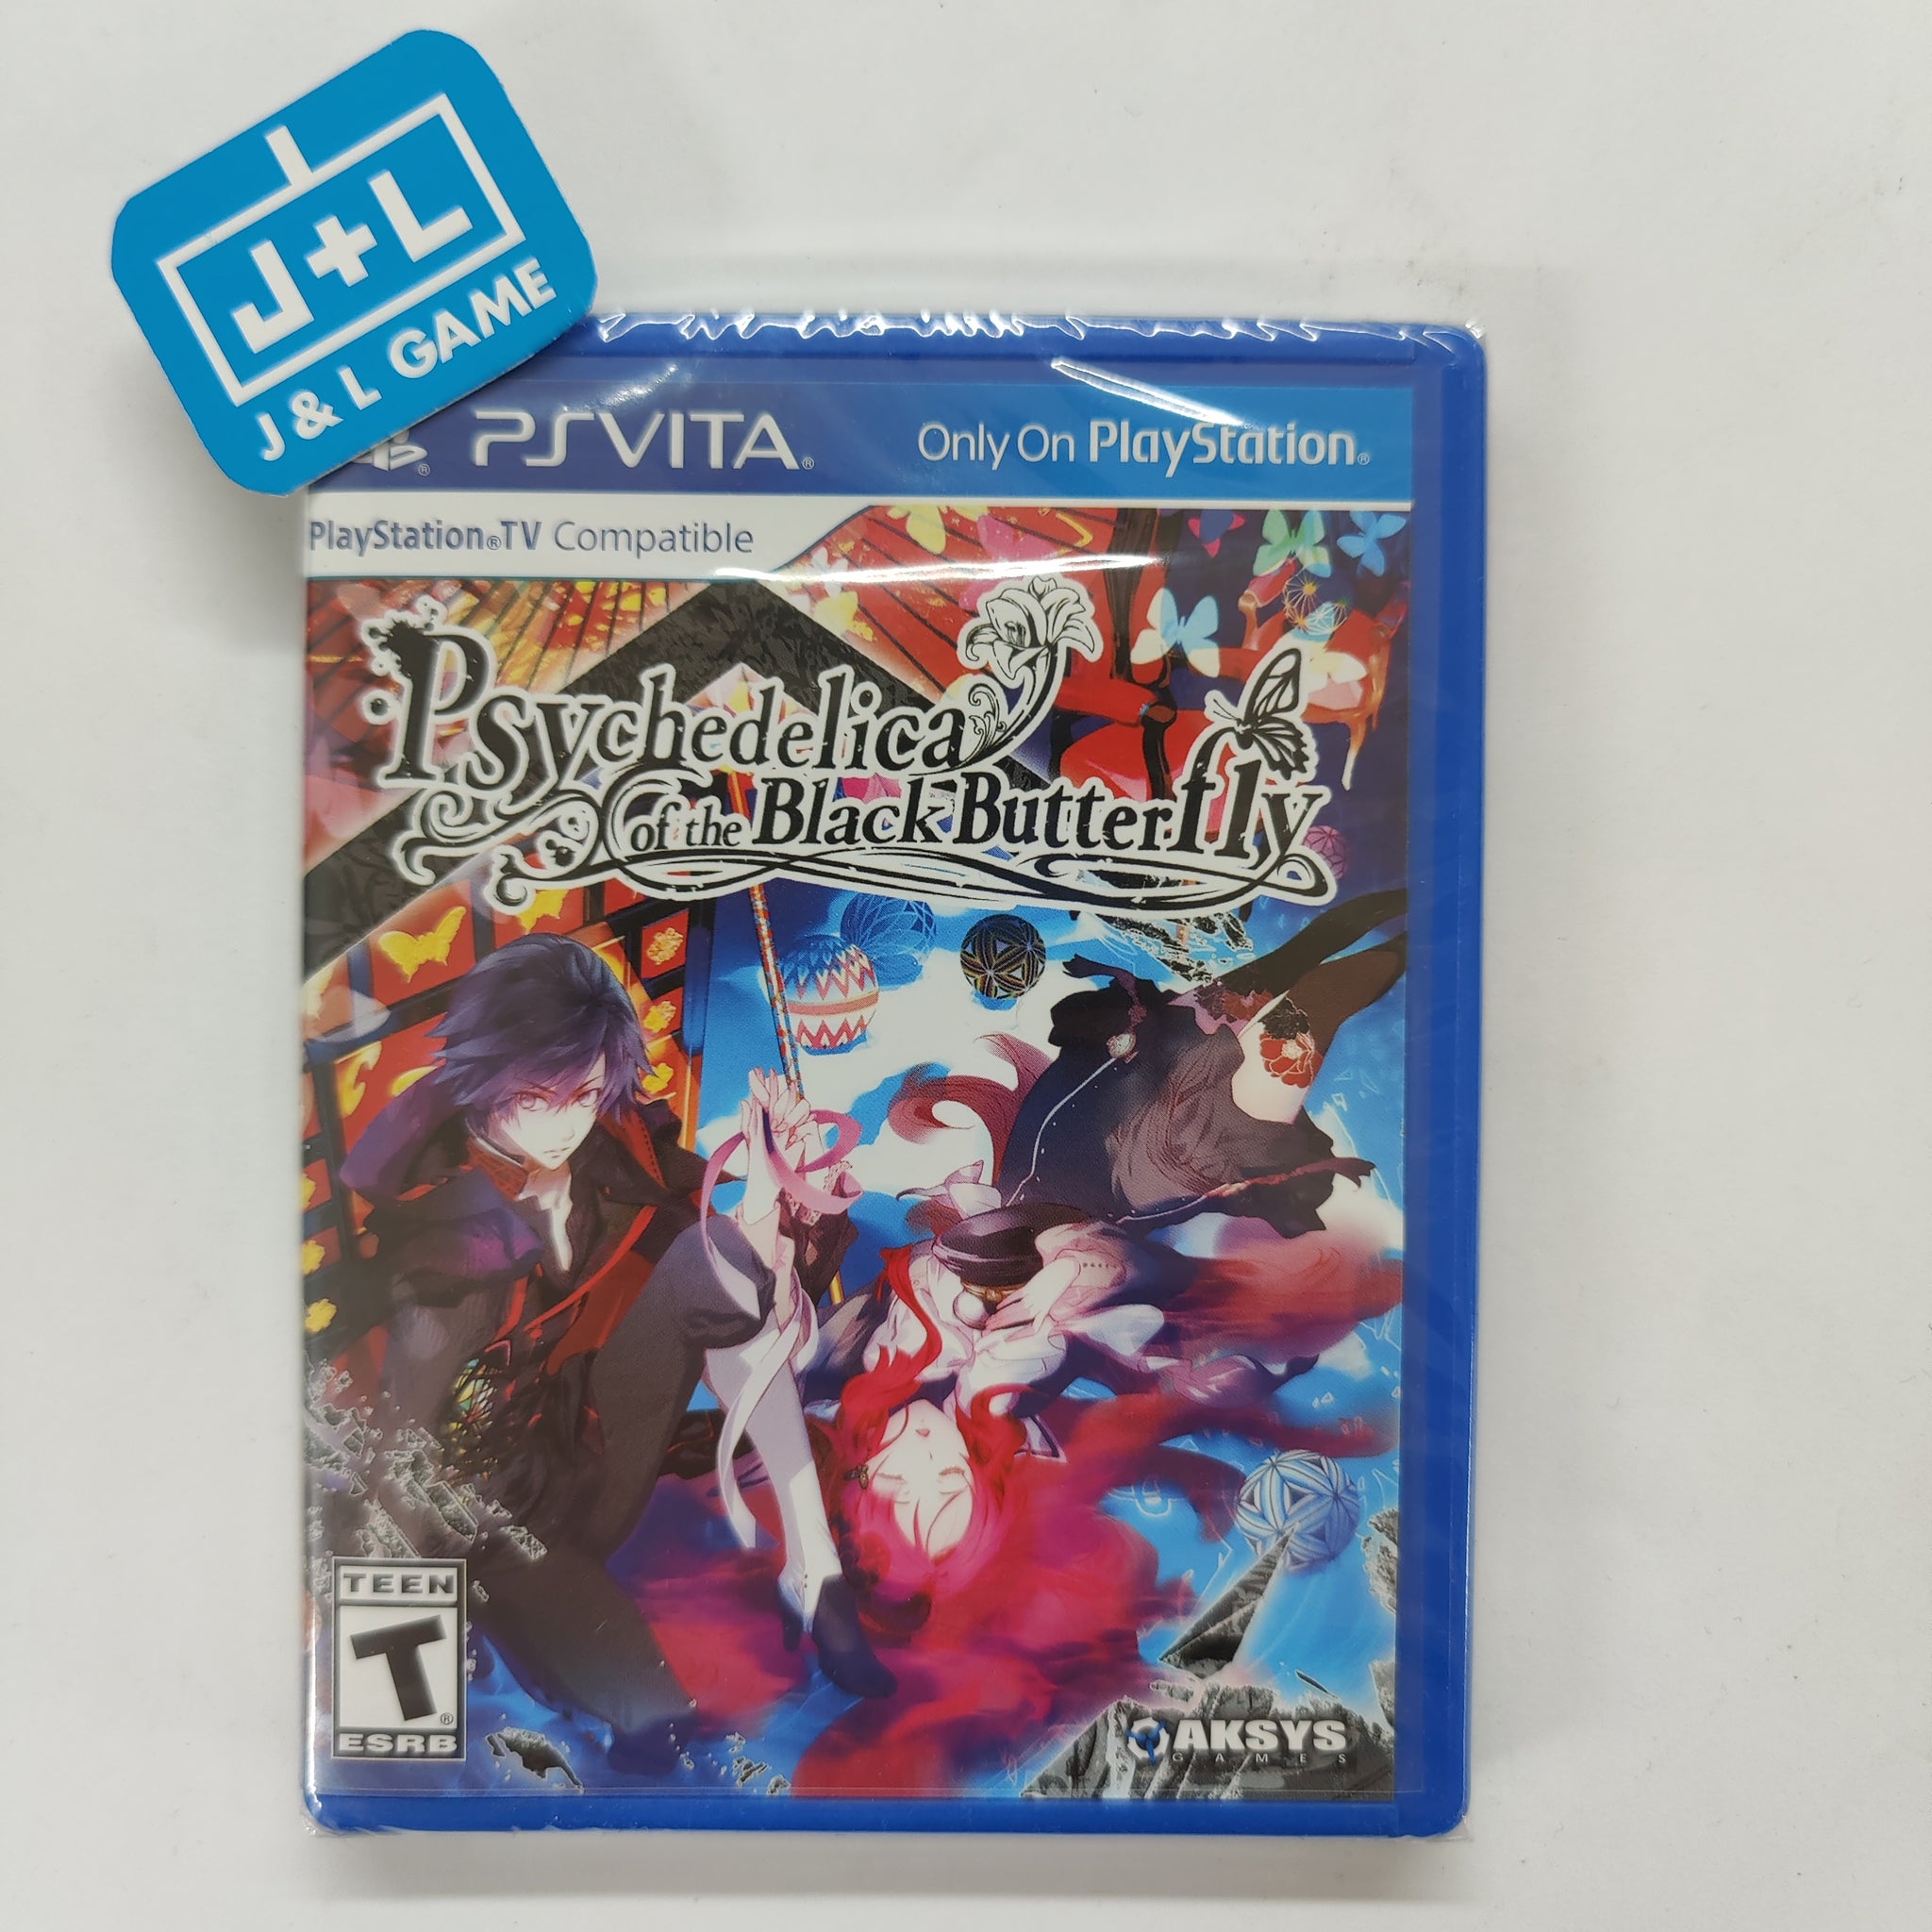 Psychedelica of The Black Butterfly - (PSV) PlayStation Vita Video Games Aksys   